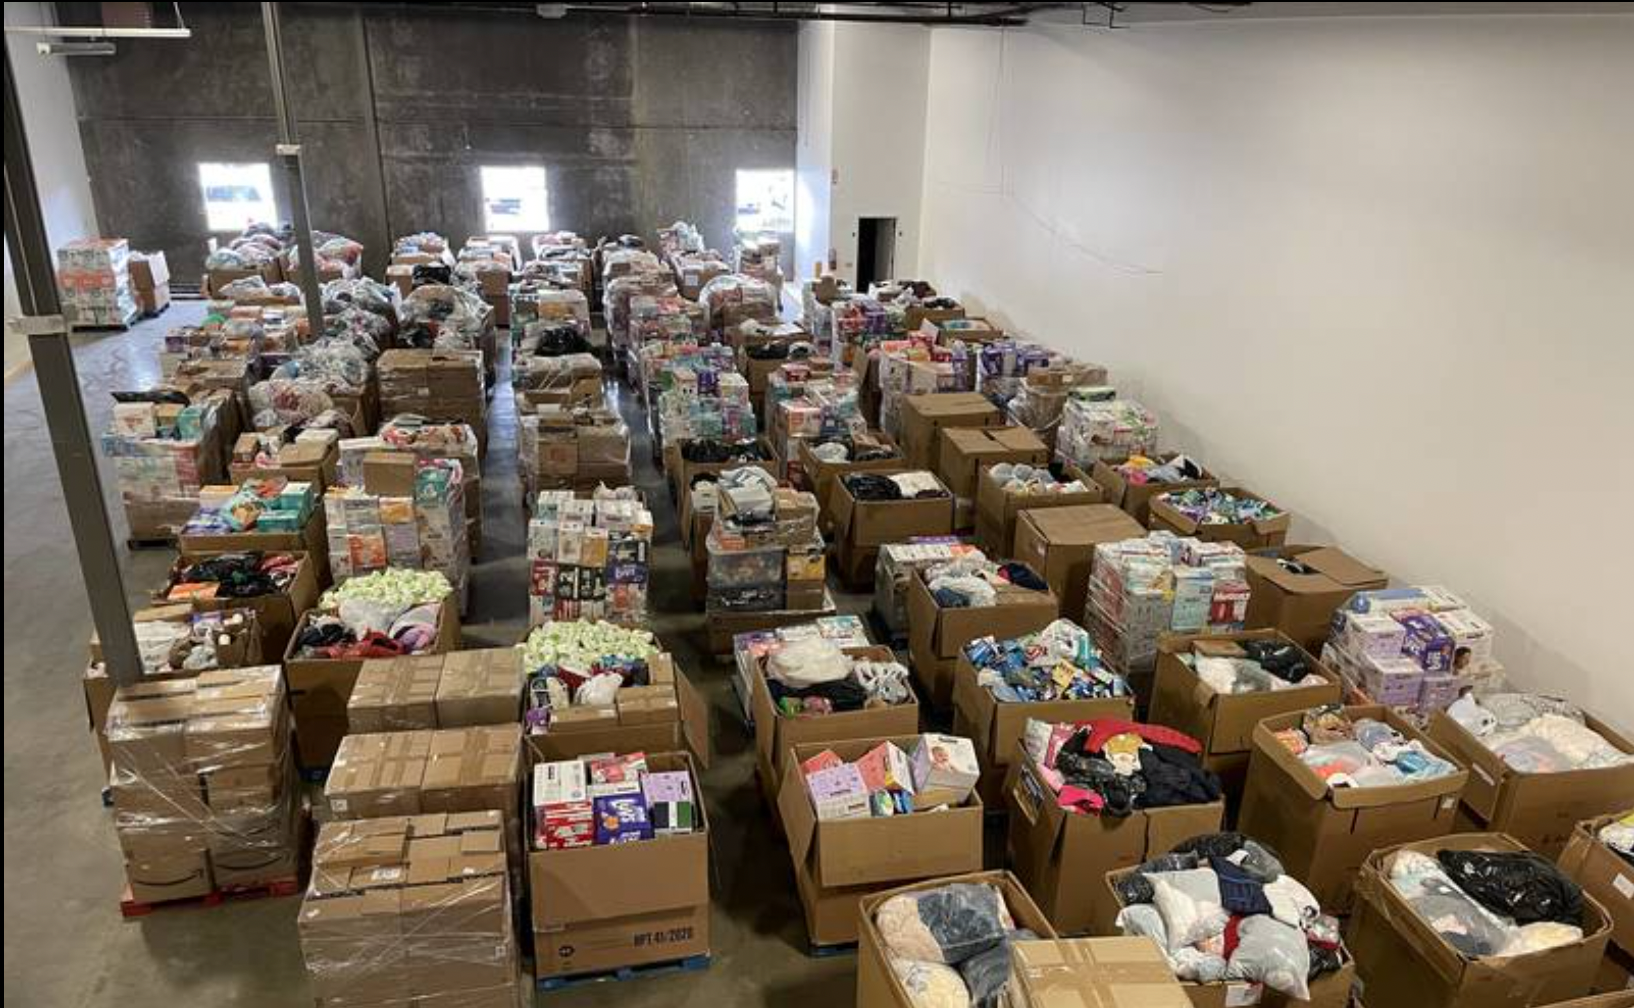 Driven to Assist Utah for Ukraine donations ready for sorting at the Utah Food Bank on March 16, 20...